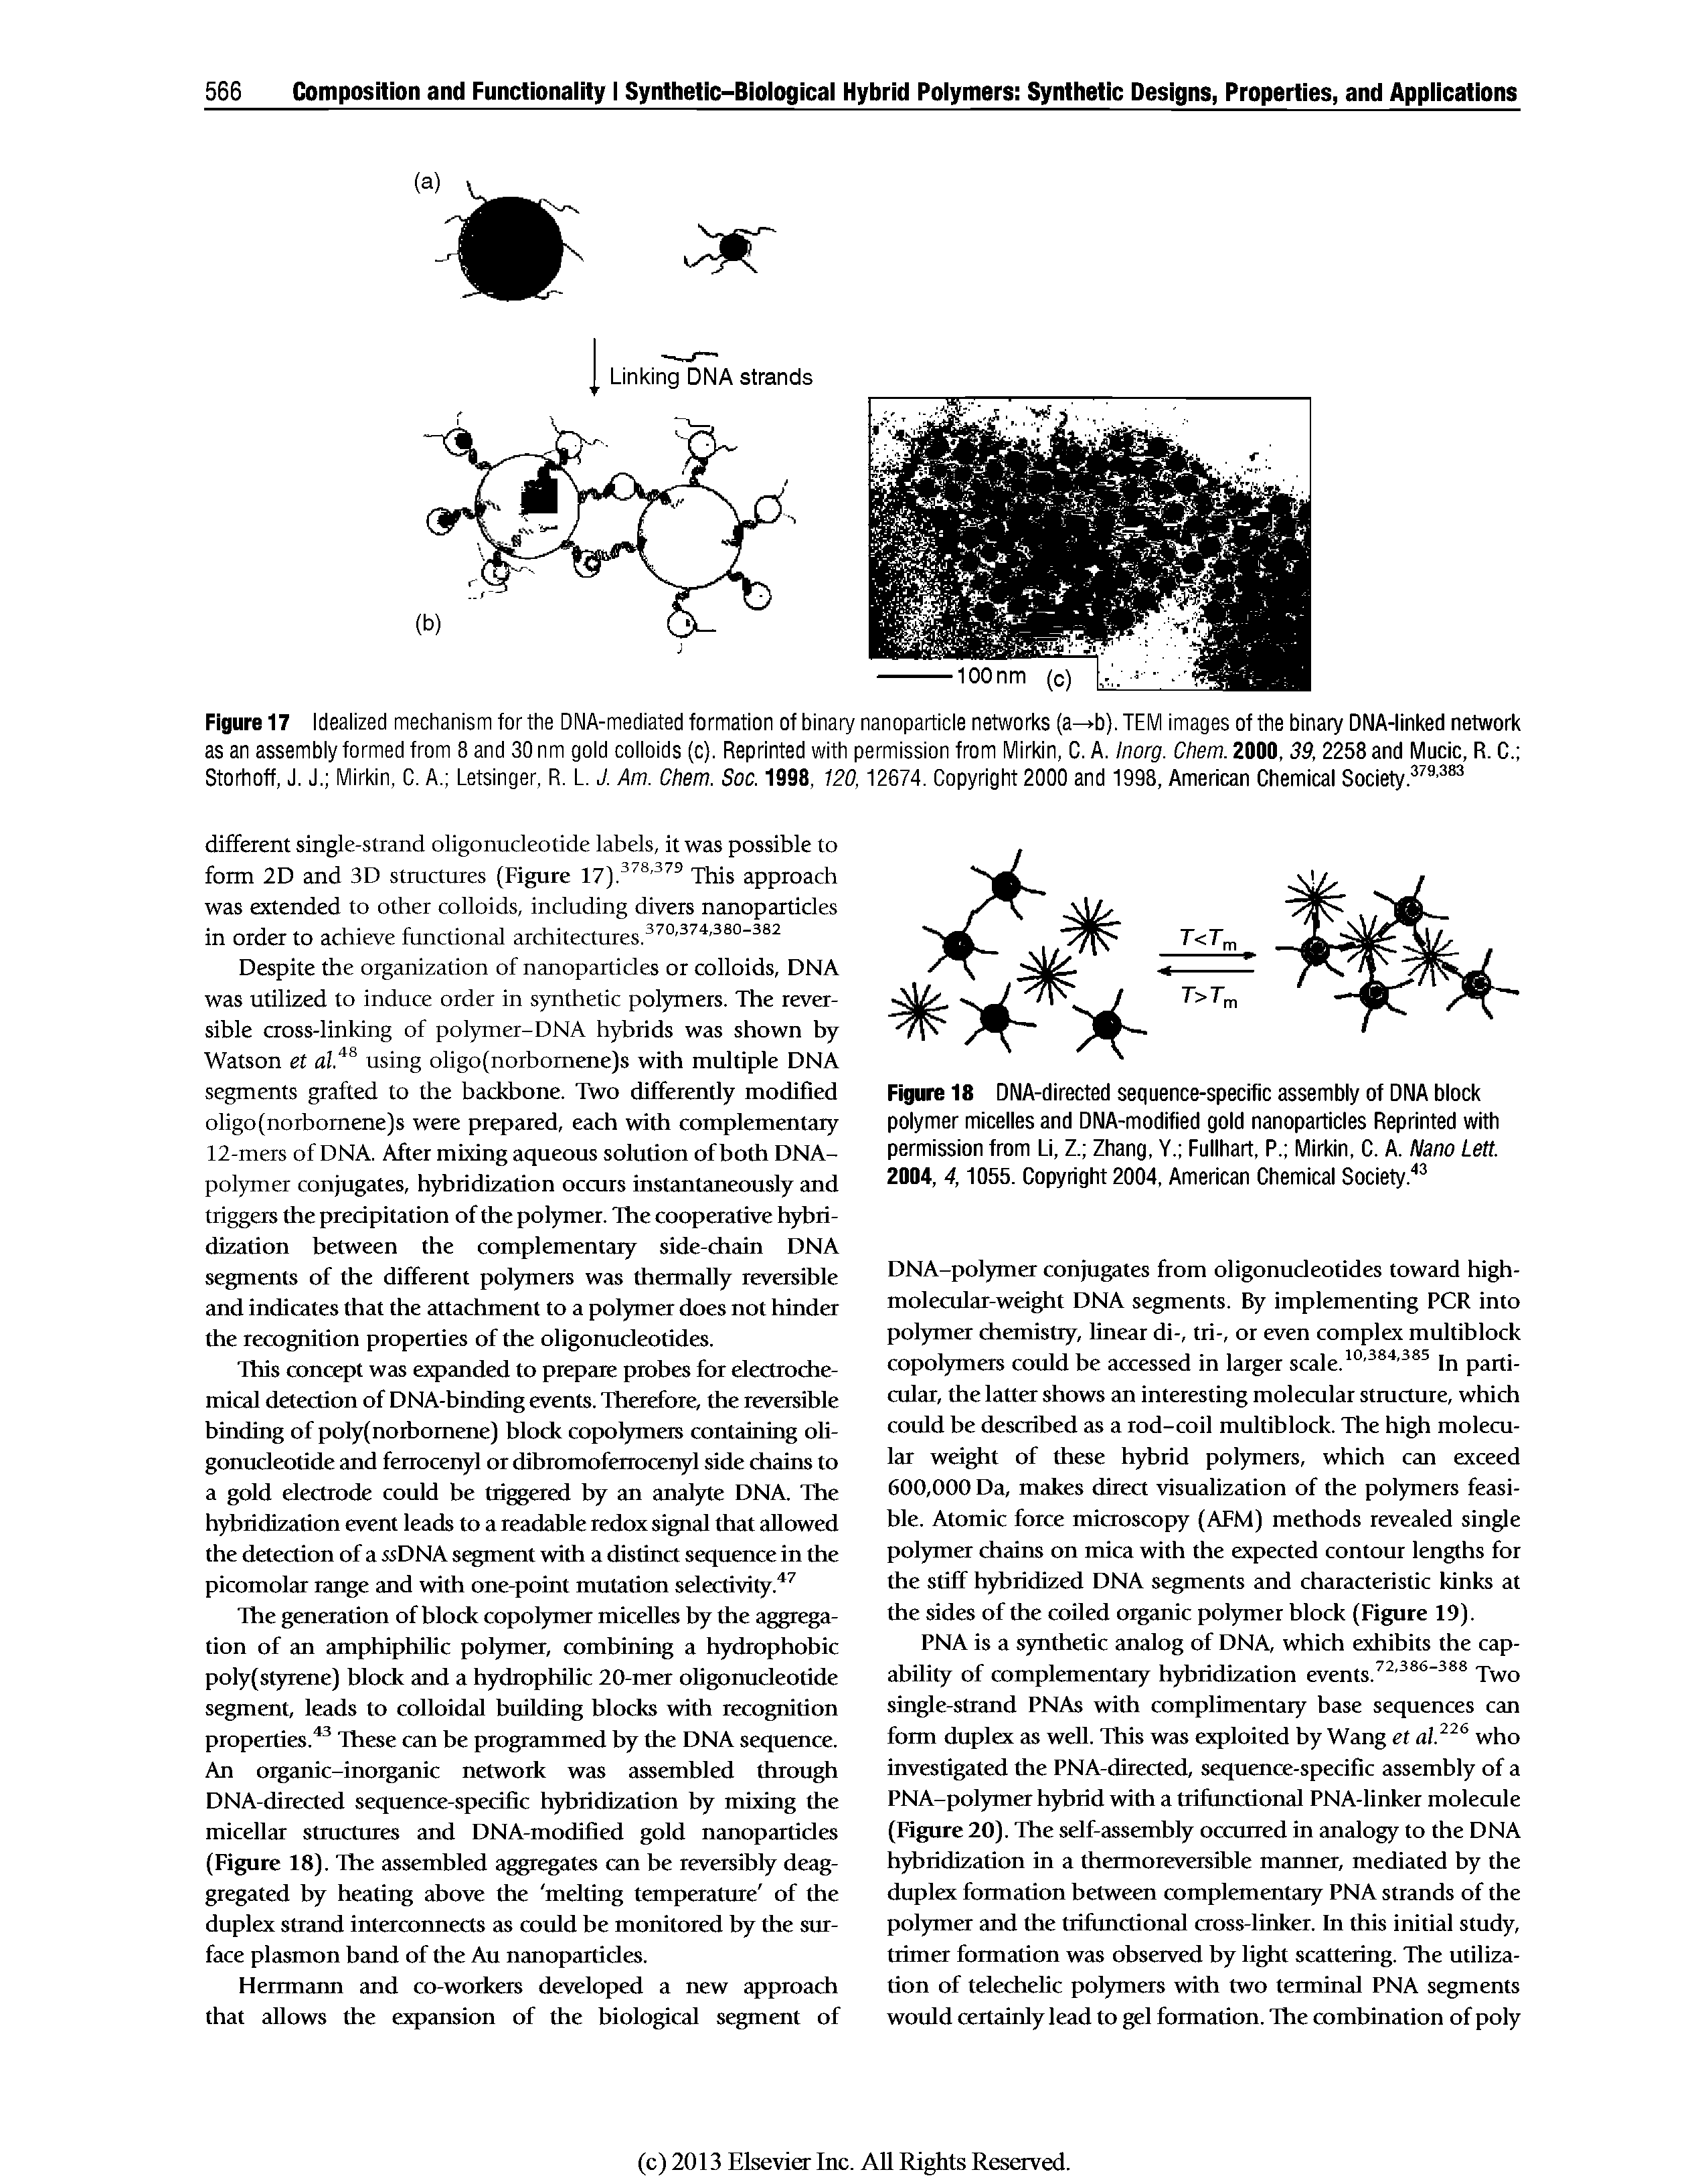 Figure 17 Idealized mechanism for the DNA-mediated formation of binary nanoparticle networks (a b). TEM images of the binary DNAHinked network as an assembly formed from 8 and 30 nm gold colloids (c). Reprinted with permission from Mirkin, C. A. Inorg. Chem. 2000,39,2258 and Mucic, R. C. Storhoff, J. J. Mirkin, C. A. Letsinger, R. L. J. Am. Chem. Soc. 1998, 120,12674. Copyright 2000 and 1998, American Chemical Society. - ...